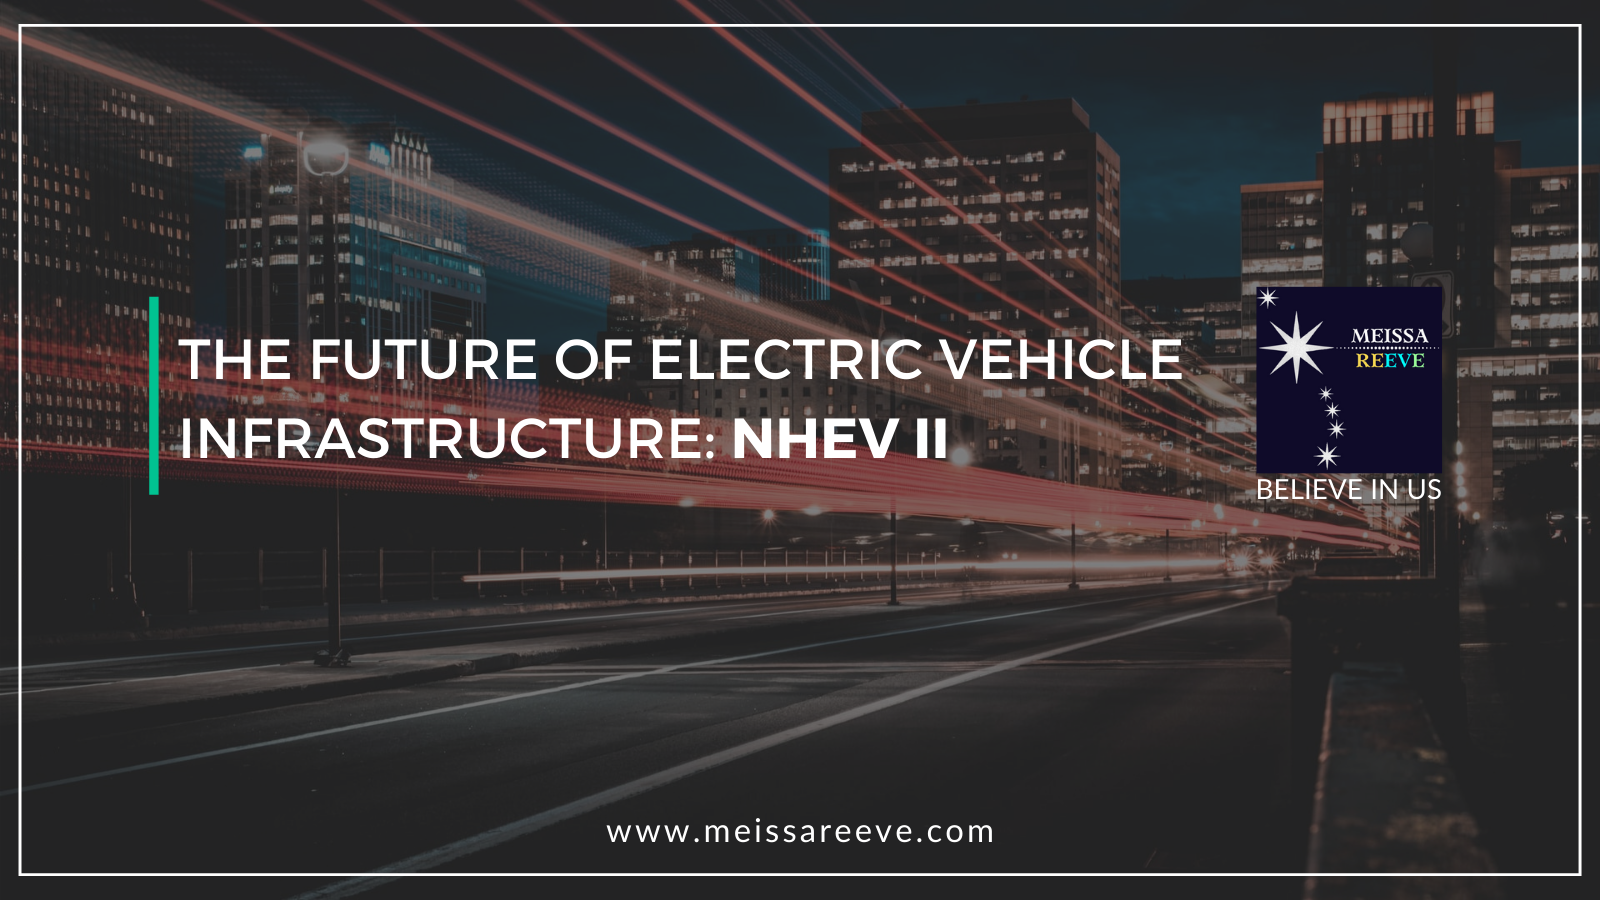 The future of Electric Vehicle Infrastructure: NHEV II